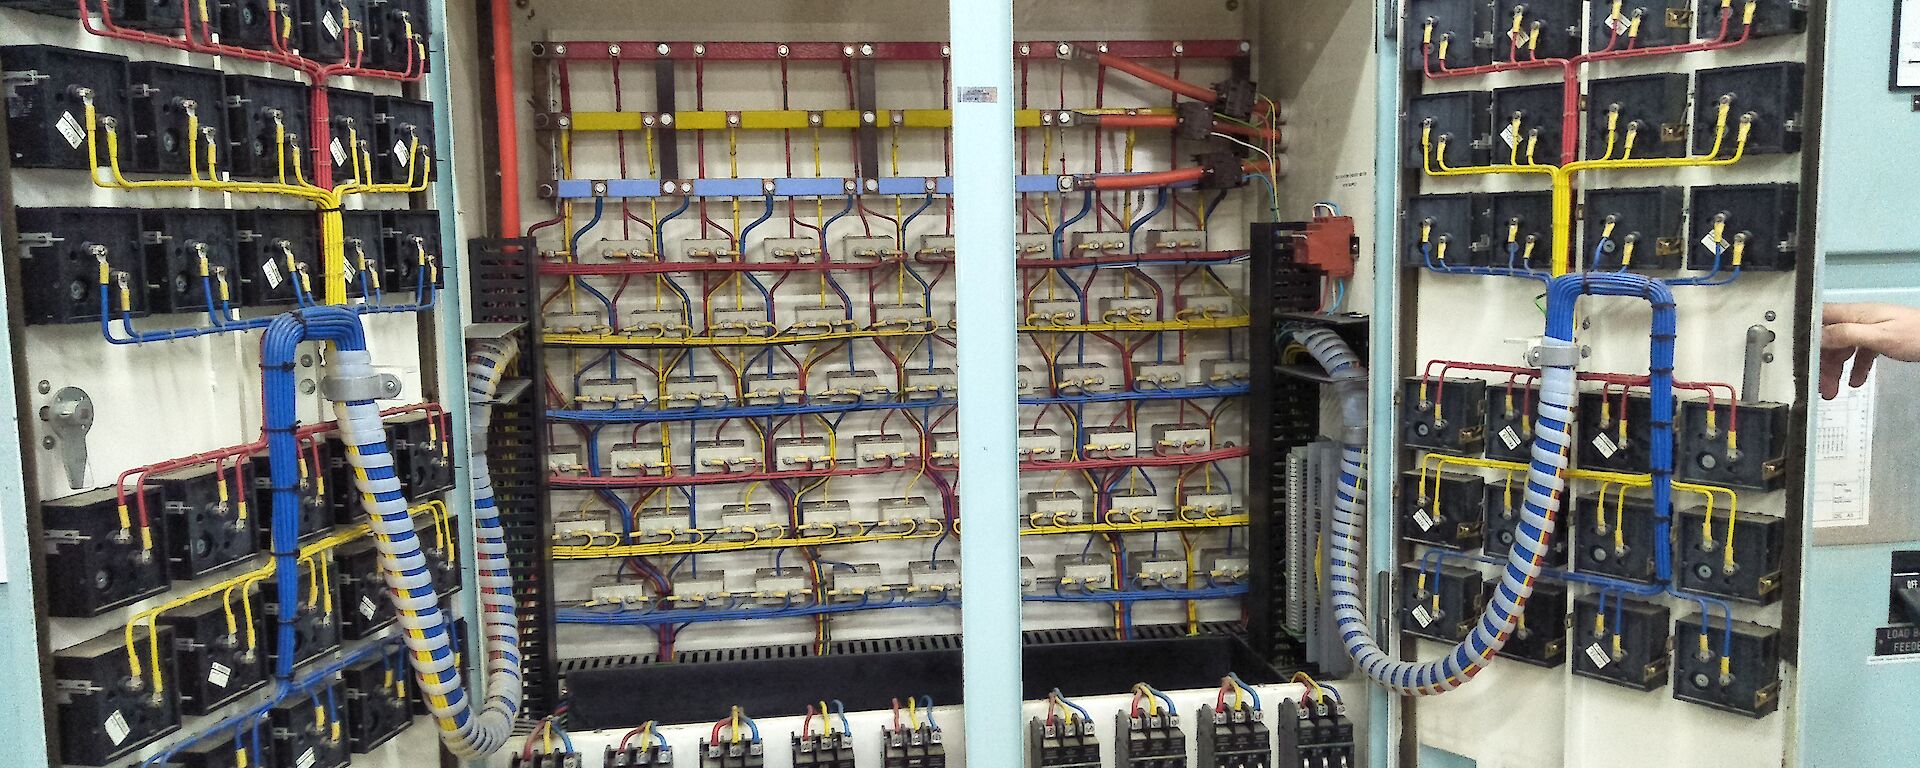 A large electrical switchboard with lots of wires